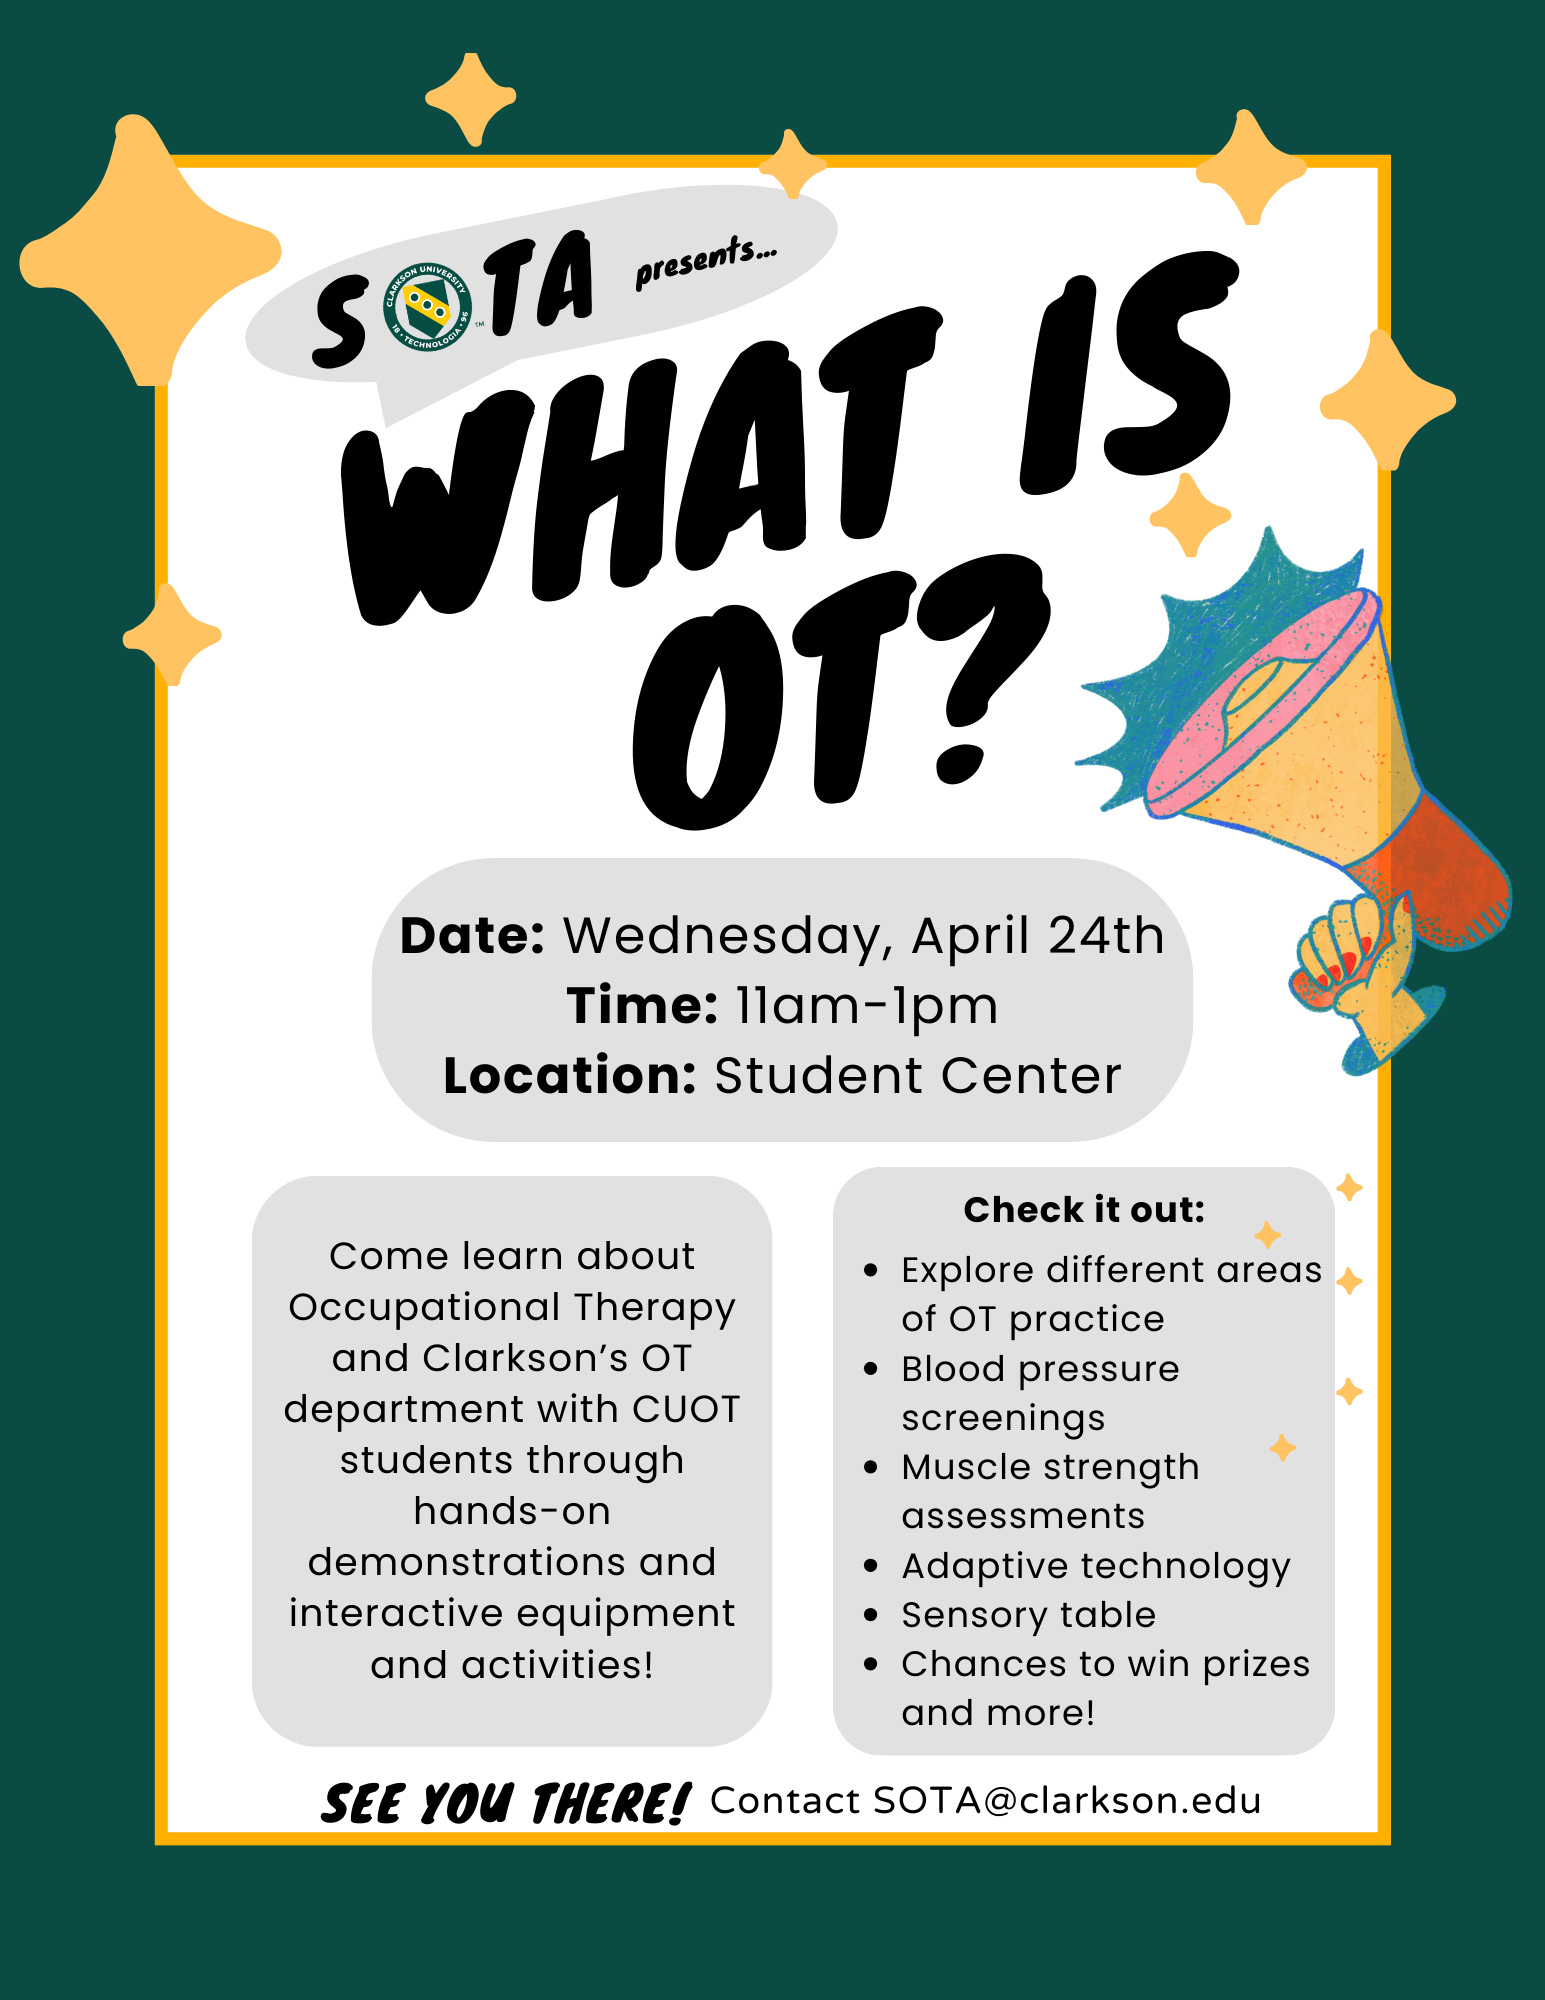 Image description: Template with heading, note the CUOT logo is used for the O in SOTA. middle section block with event information (date, time,location) and two additional block beneath that (centered). Both blocks provided with text (stated above) and last line of the template indicates "See you there! Contact SOTA@clarkson.edu" There is also a megaphone on the template. SOTA Presents… What is OT? Date: Wednesday, April 24th Time: 11am-1pm Location: Student Center Come learn about Occupational Therapy and Clarkson’s OT department with CUOT students through hands-on demonstrations and interactive equipment and activities! Check it out: Explore different areas of OT practice Blood pressure screenings Muscle strength assessments Adaptive technology Sensory table Chances to win prizes and more! See you there! Contact SOTA@clarkson.edu